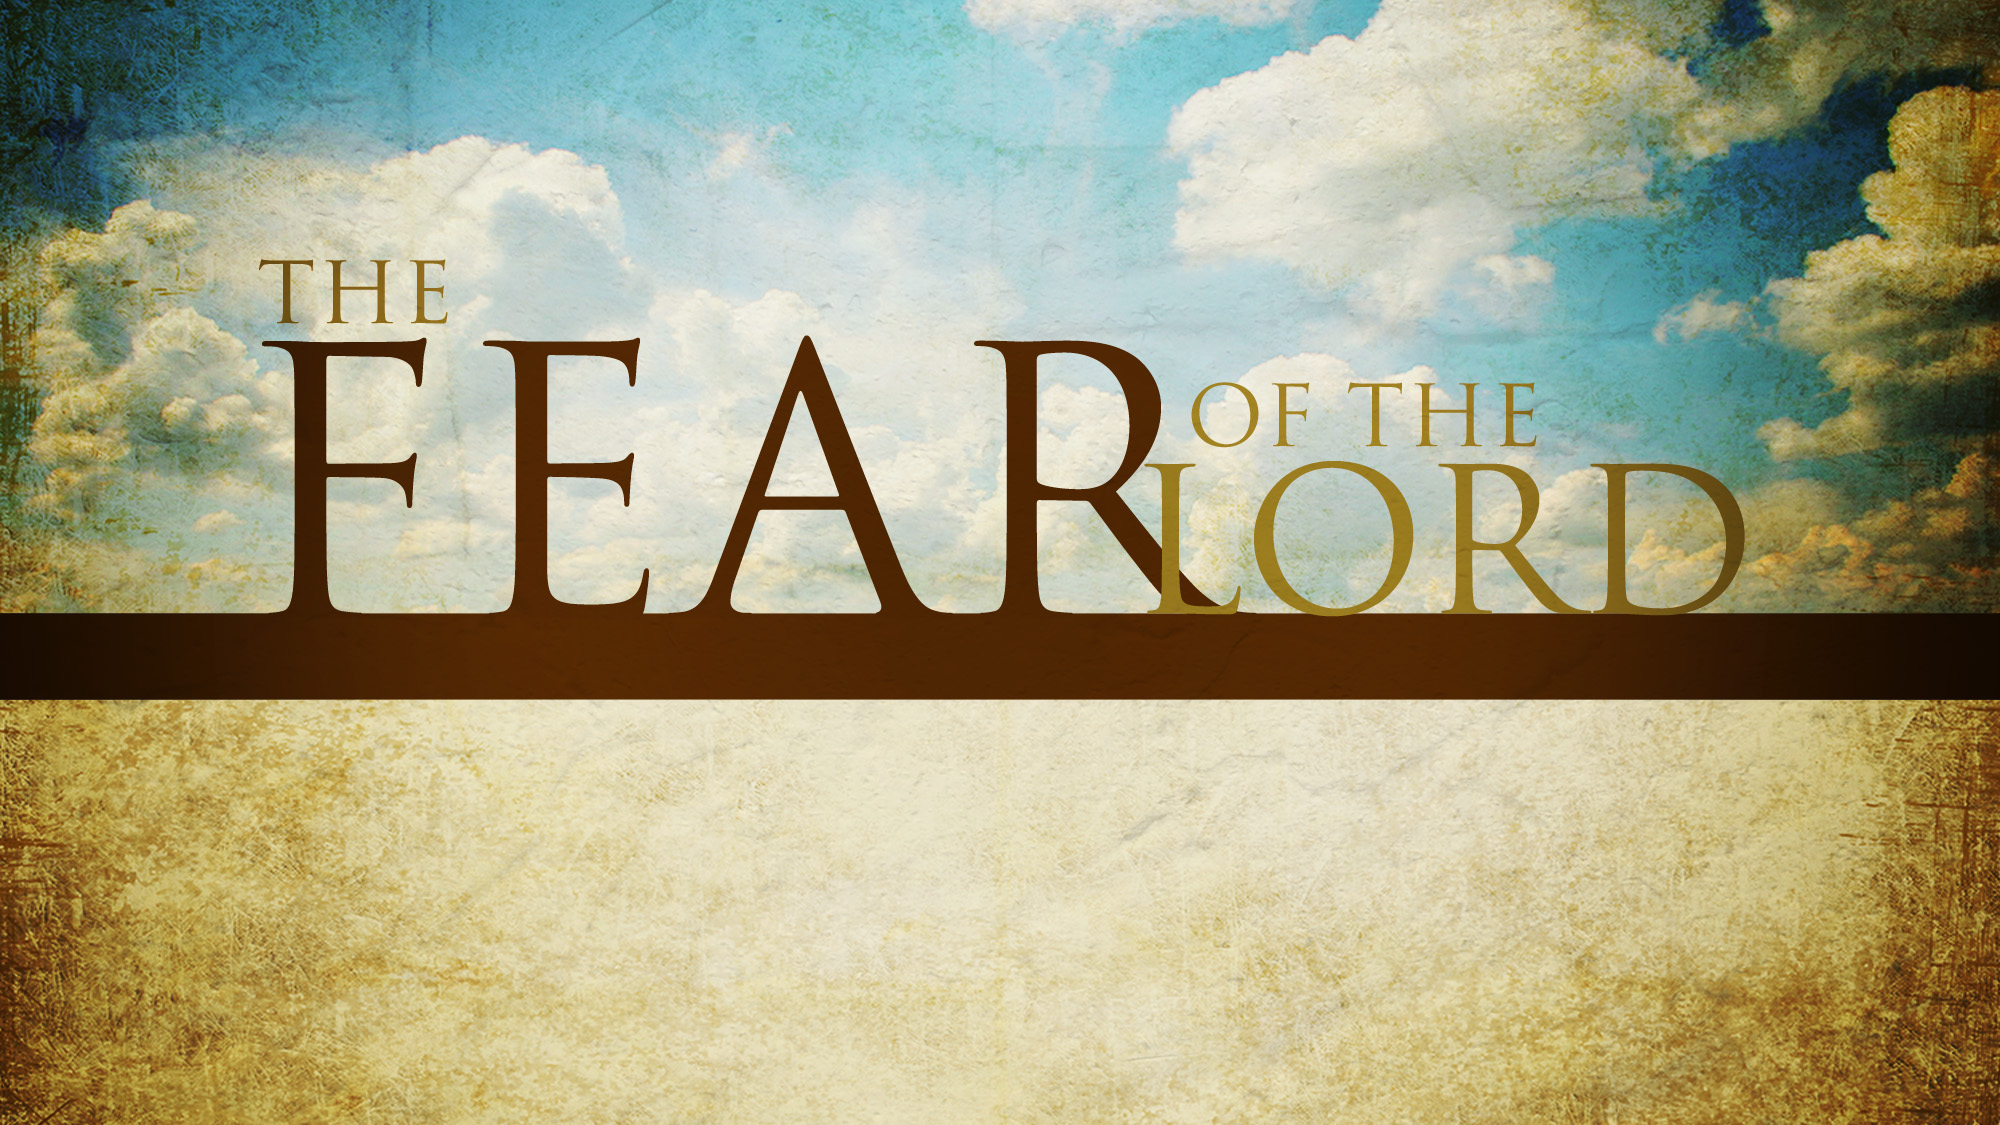 THE FEAR OF THE LORD, Devotional box, Daily Devotional, Pastor, Bible, Isaiah Wealth Ministries, Word of God, it begins with acknowledging God, prophet isaiah wealth, loving God, reverence towards God